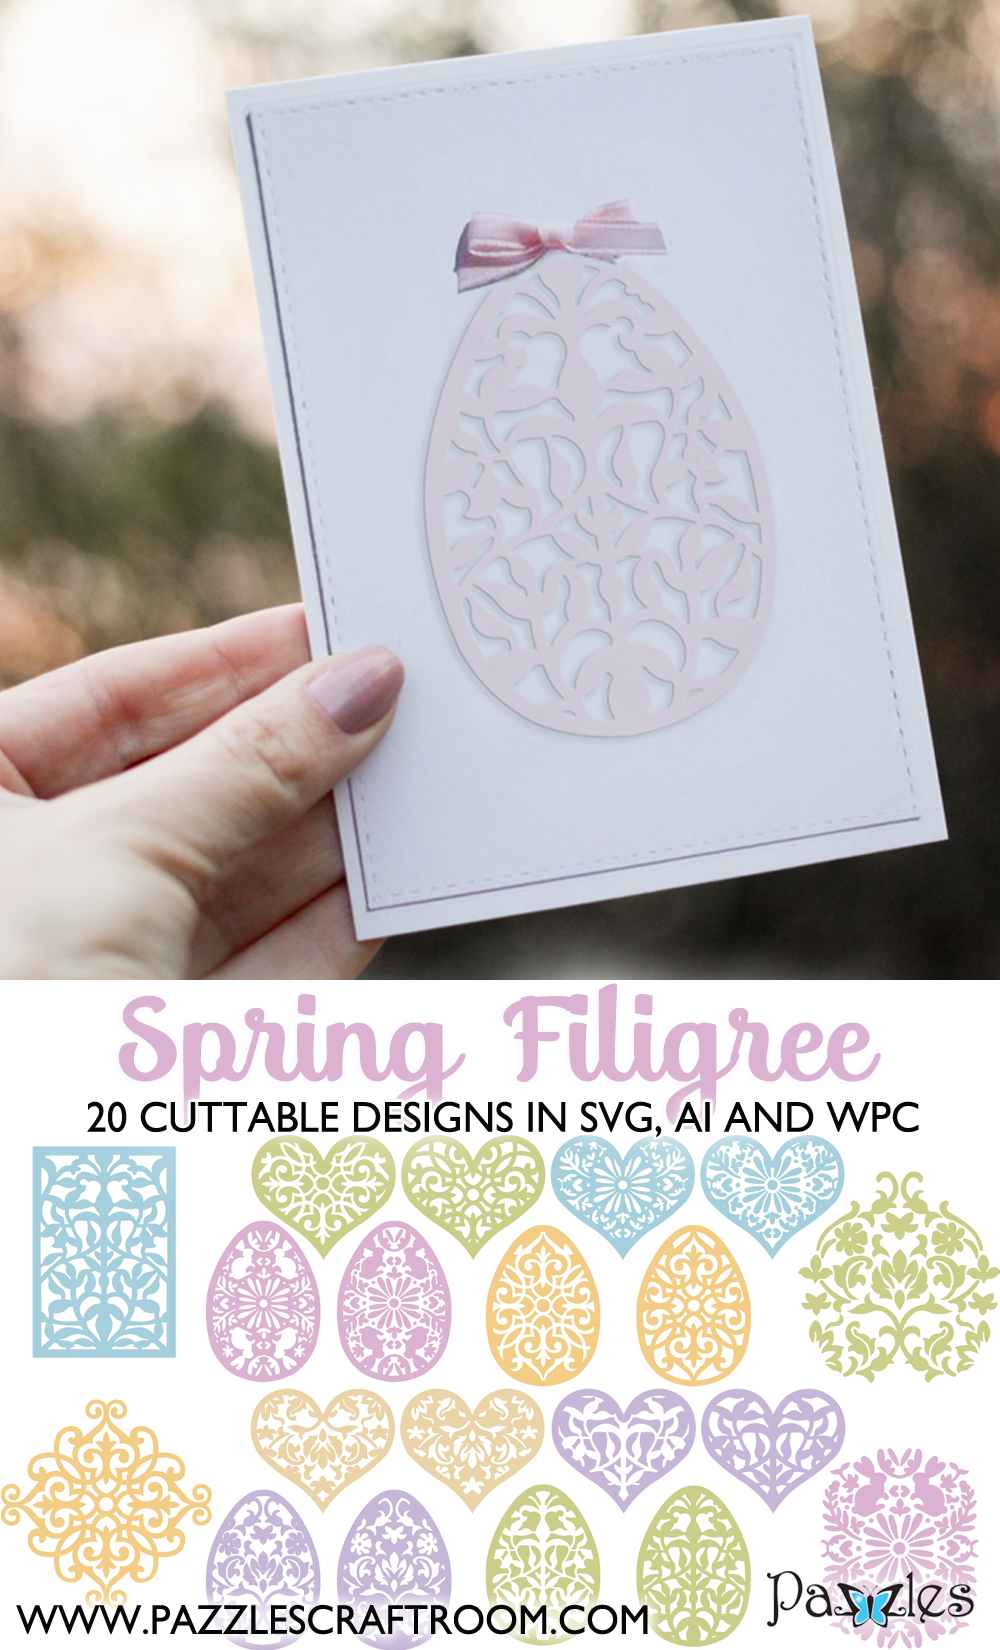 Pazzles DIY Spring Filigree Cutting Collection with 20 cuttable files in SVG, AI, and WPC.  Instant SVG download compatible with all major electronic cutters including Pazzles Inspiration, Cricut, and Silhouette Cameo. Design by Amanda Vander Woude.